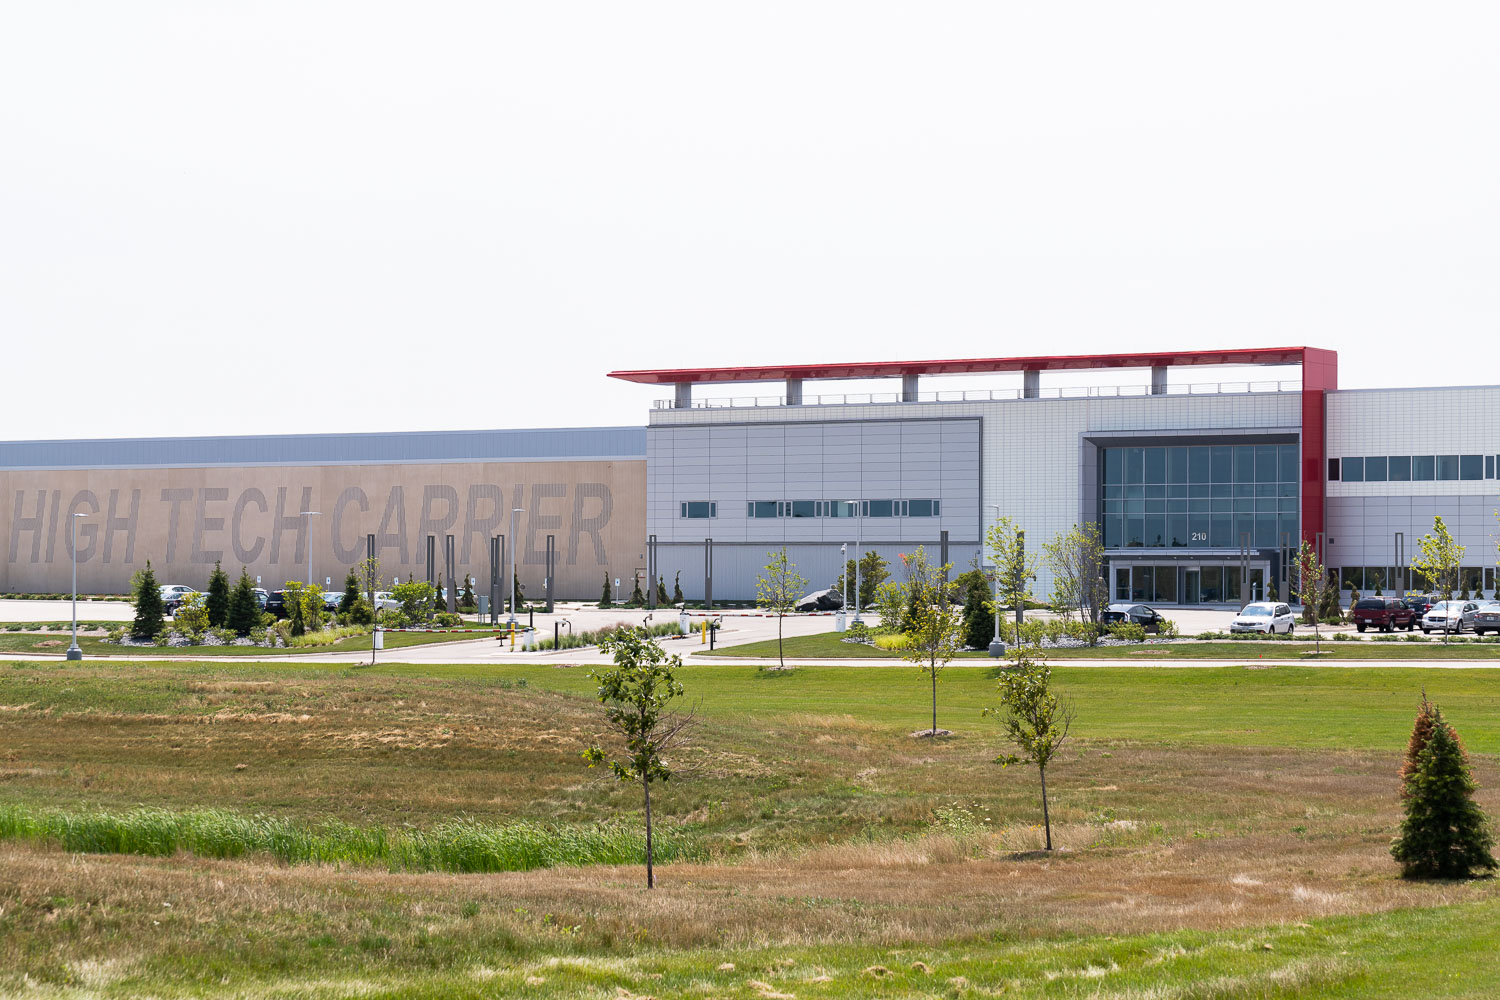 July 2021 Visit to Foxconn Wisconsin